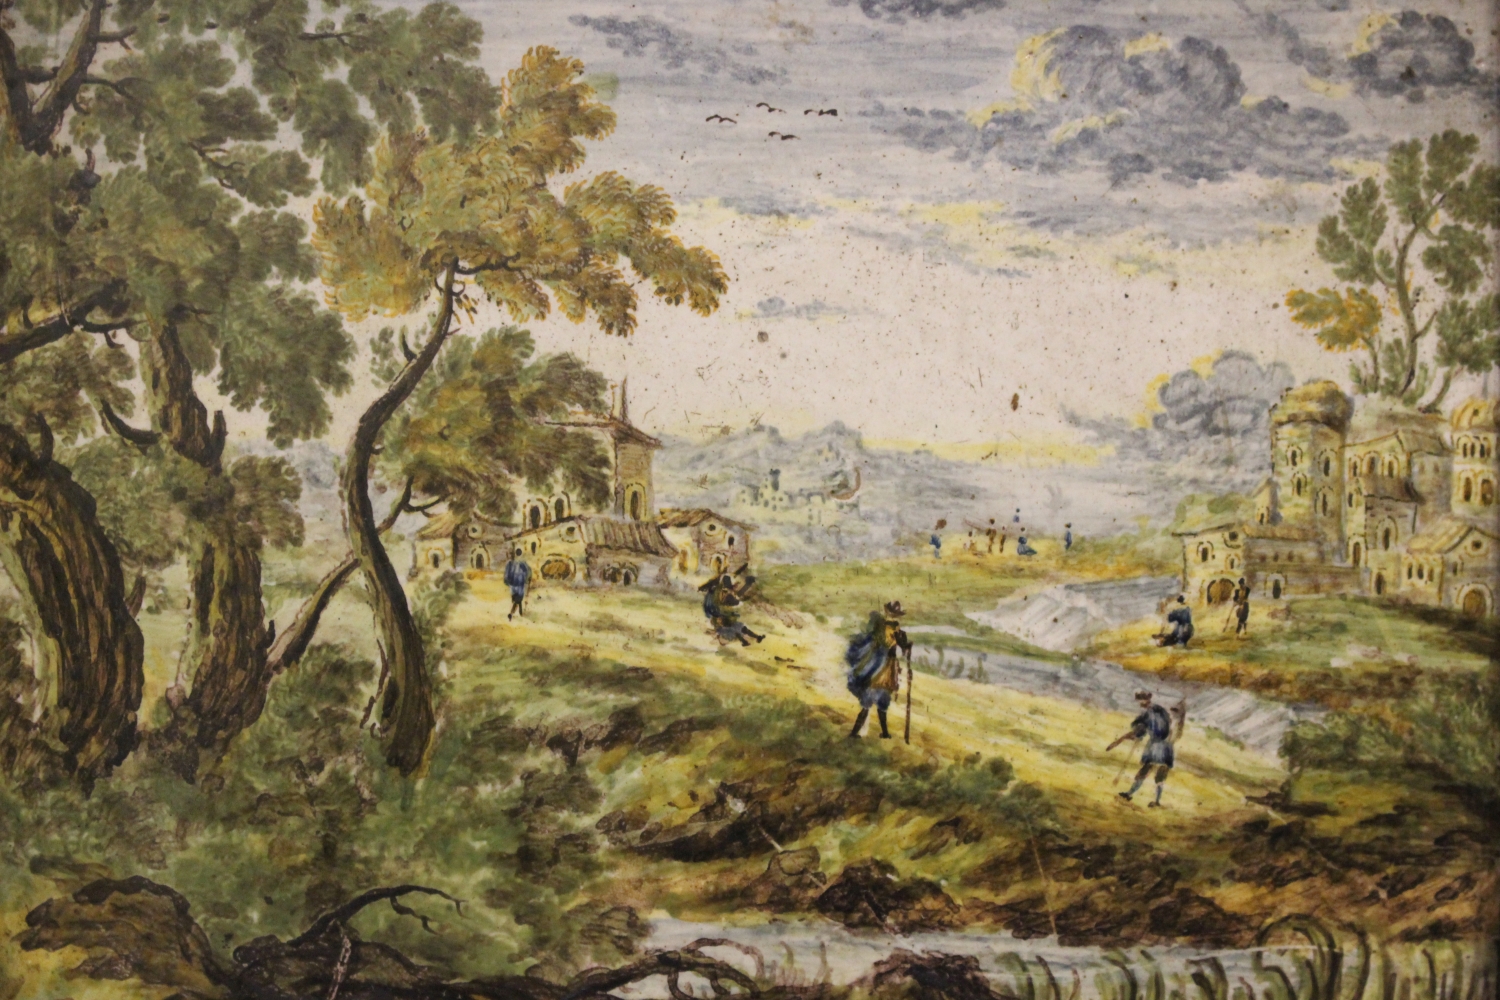 A FRAMED ‘CASTELLI’ LANDSCAPE TILE WITH FIGURES AND BUILDINGS, possibly 18th century, inscribed - Image 2 of 6